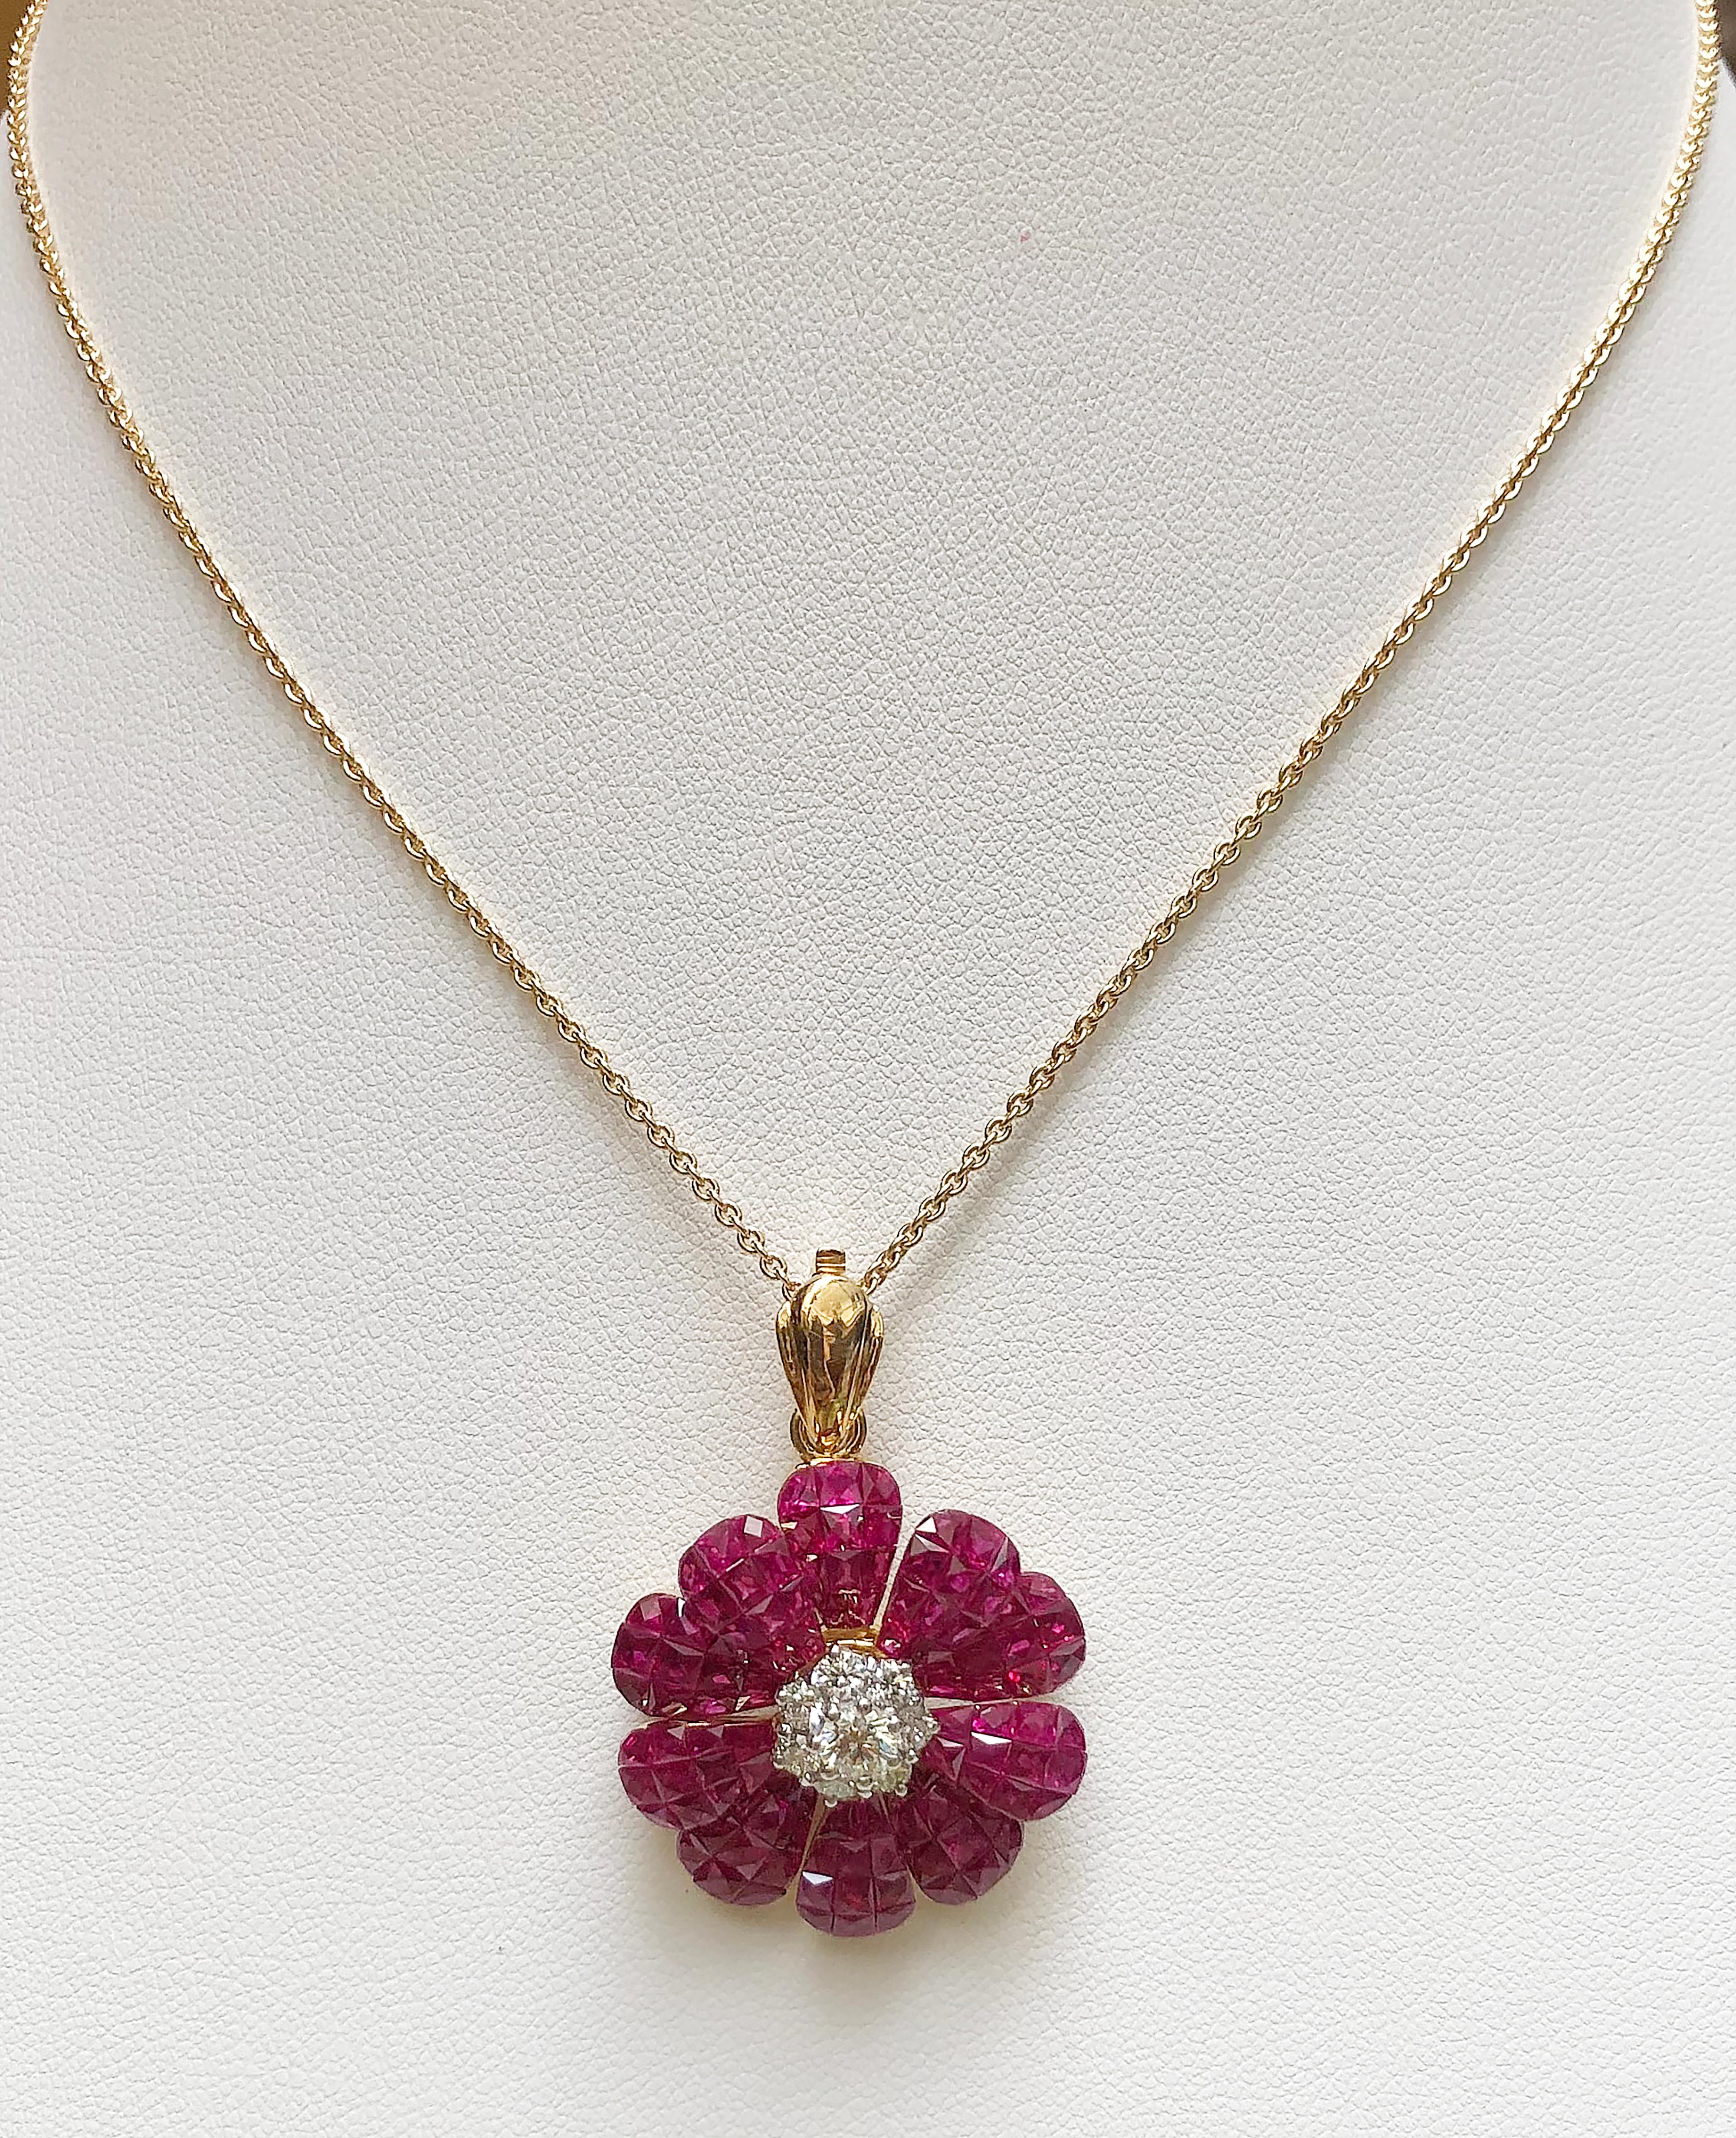 Ruby 9.33 carats with Diamond 0.71 carat Brooch/Pendant set in 18 Karat Gold Settings
(chain not included)

Width: 2.7 cm
Length: 3.8 cm 

